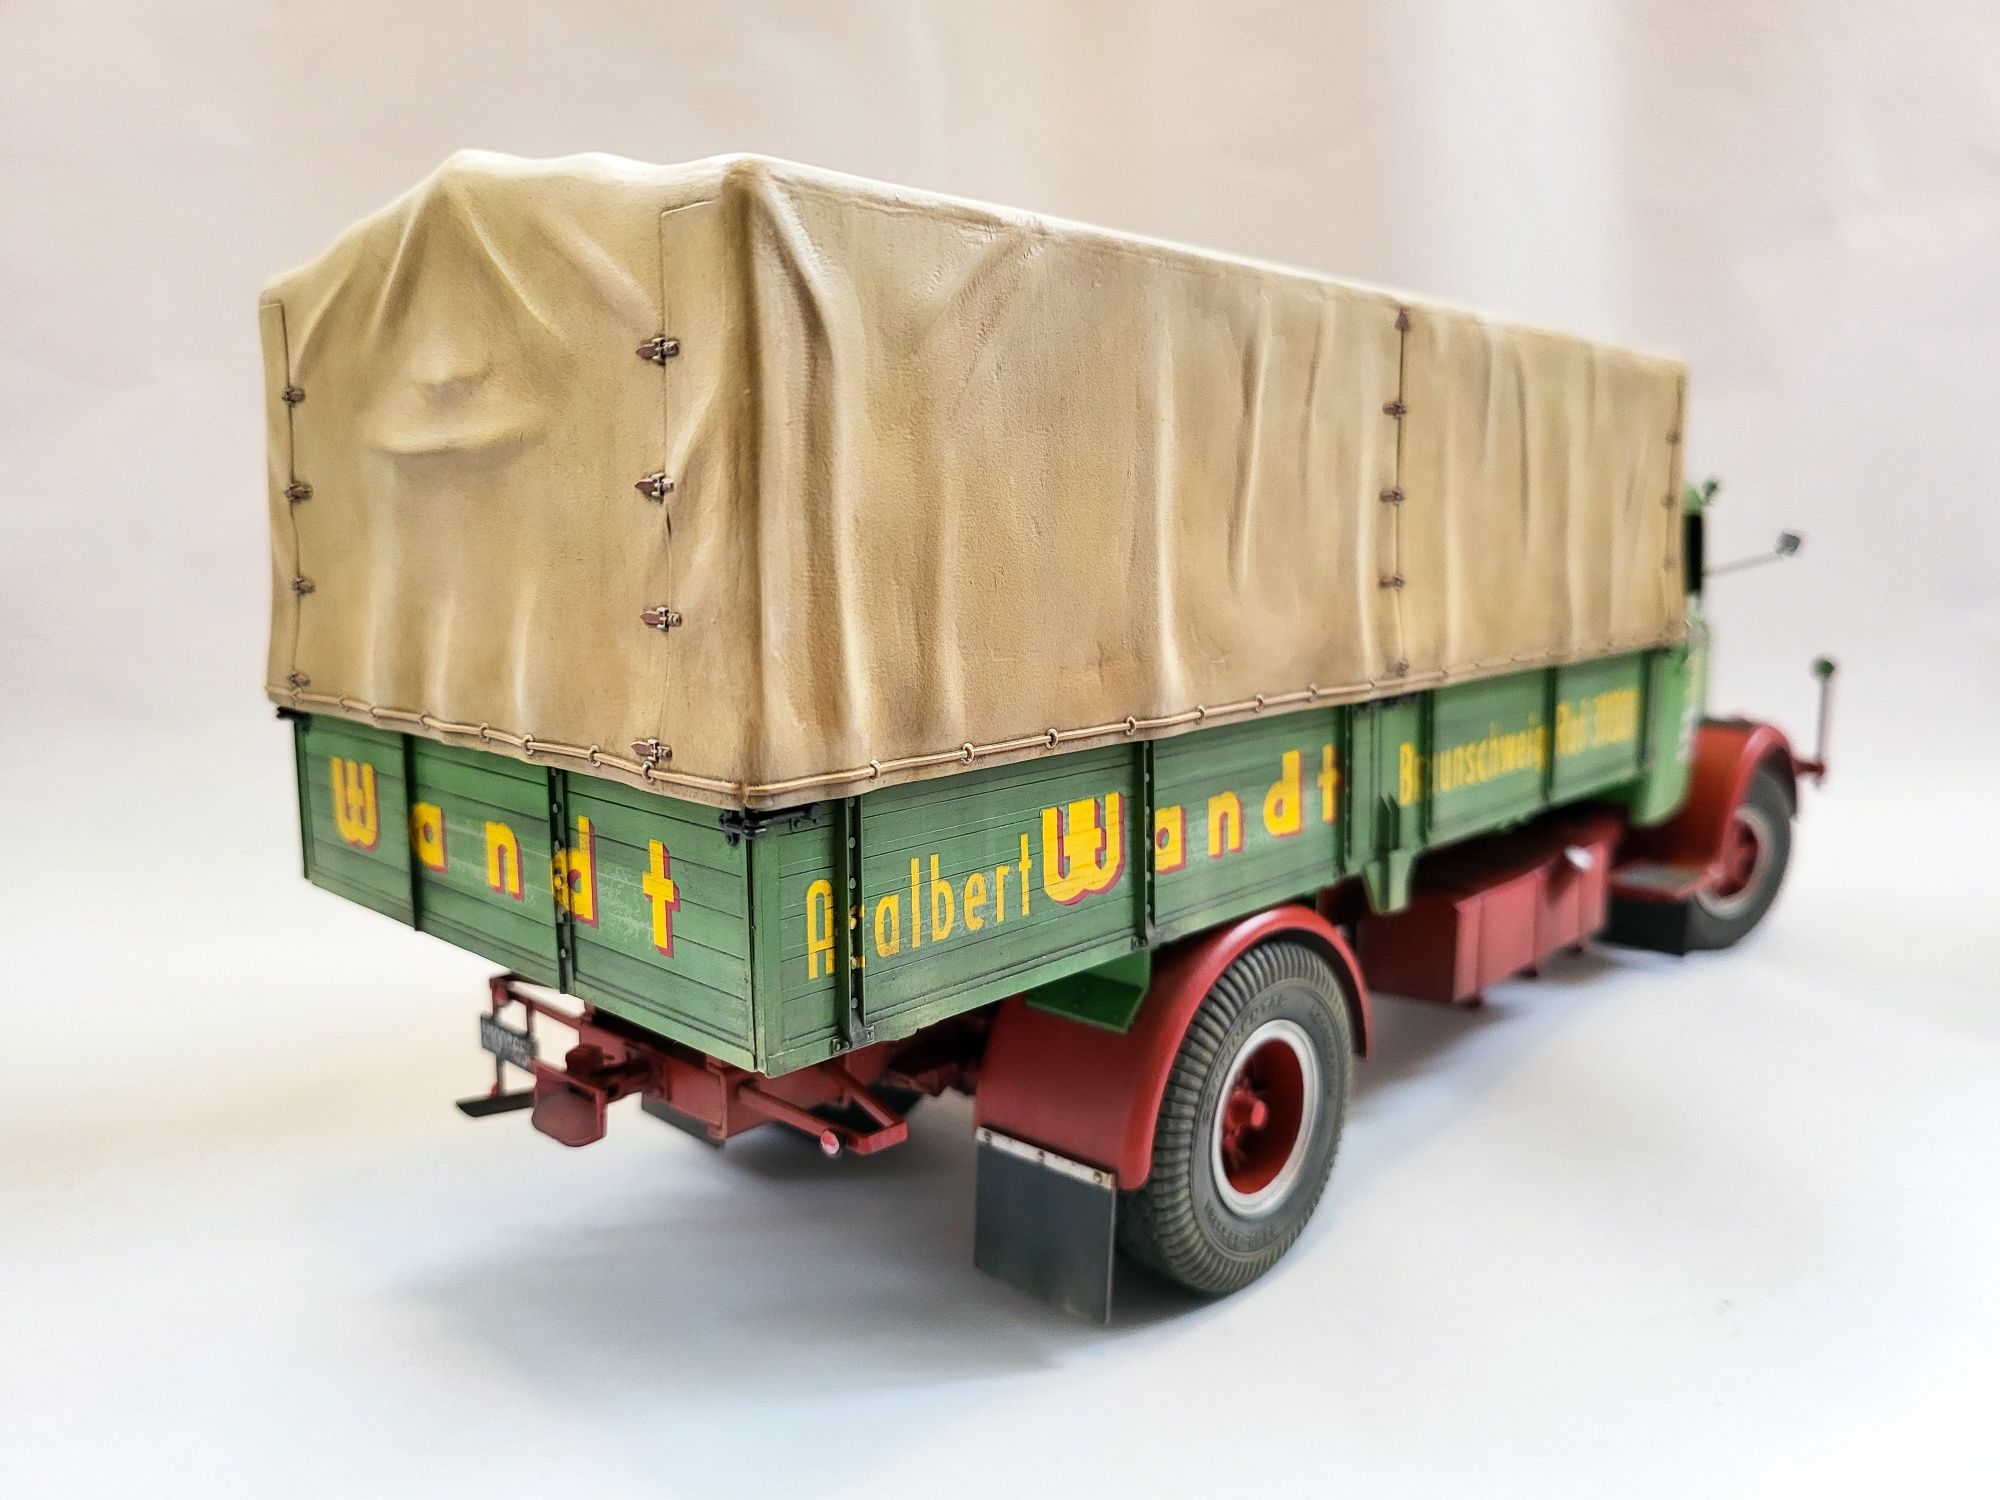 Model camion Bussing 8000 S13 scara 1:24